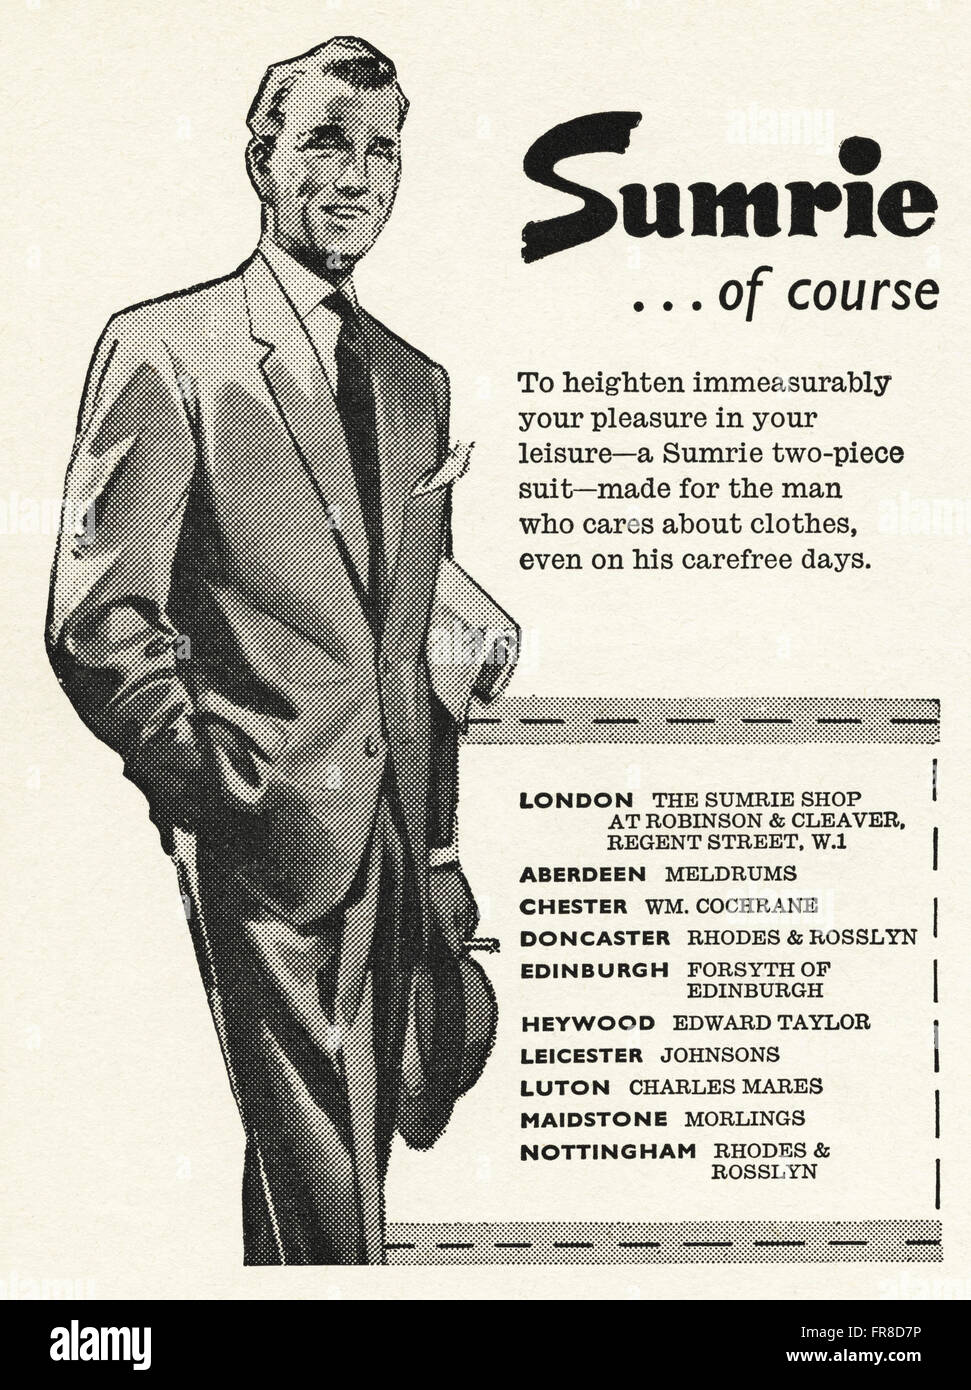 Original vintage advert from 1950s. Advertisement dated 1959 advertising SUMRIE suits for men. Stock Photo